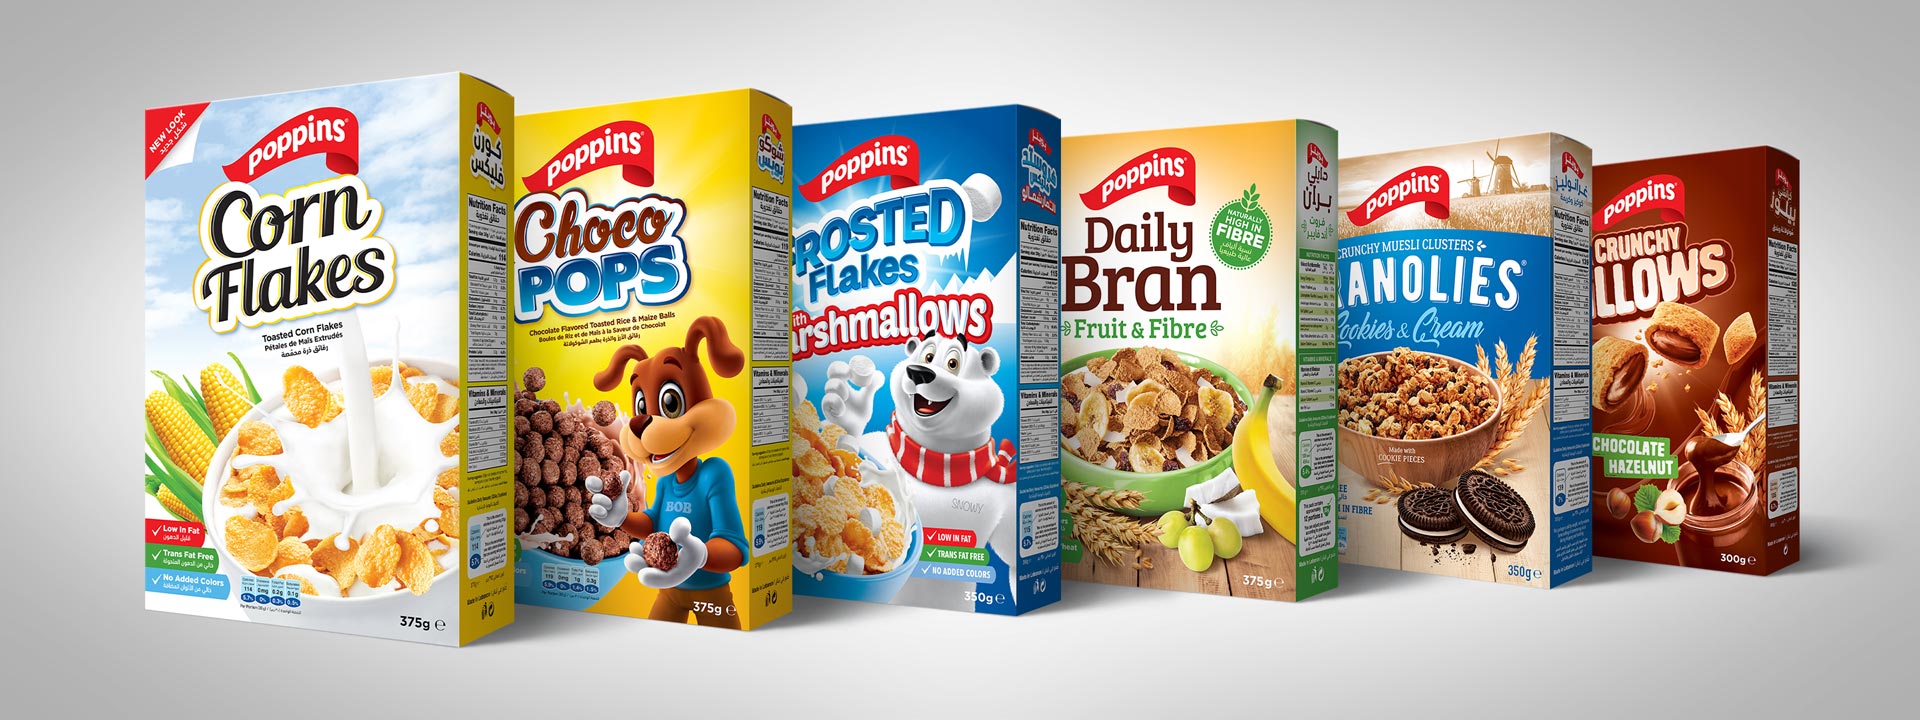 Poppins Products LineUp - Corn Flakes - Choco Pops - Frosted Flakes with Marshmallows - Granolies - Daily Bran - Crunchy Pillows